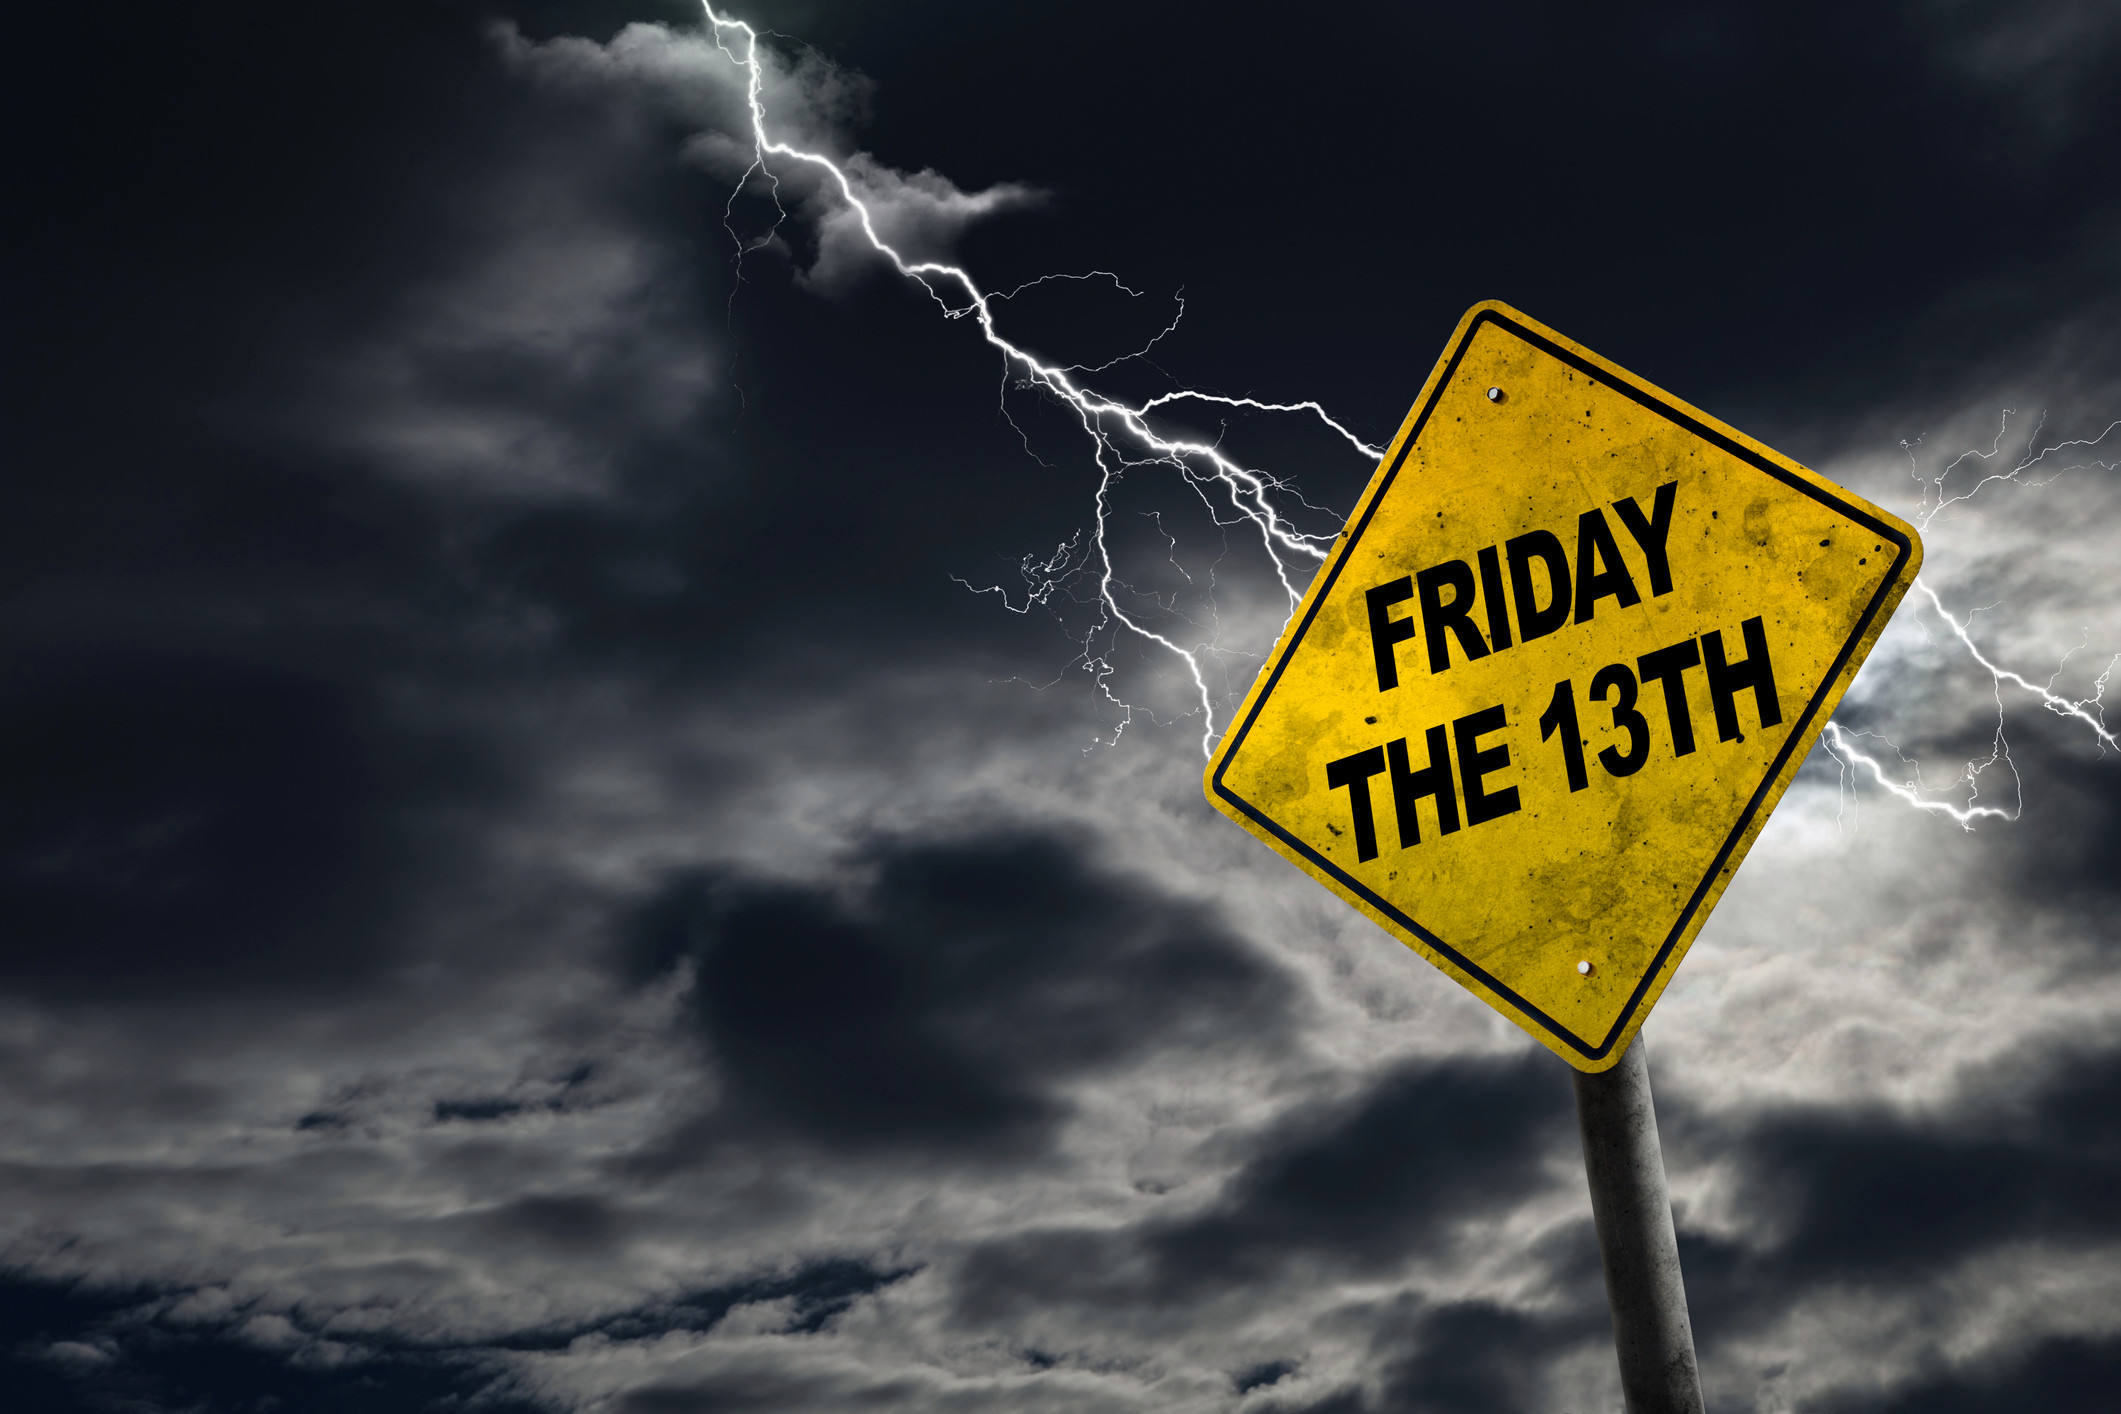 How often does Friday the 13th occur?